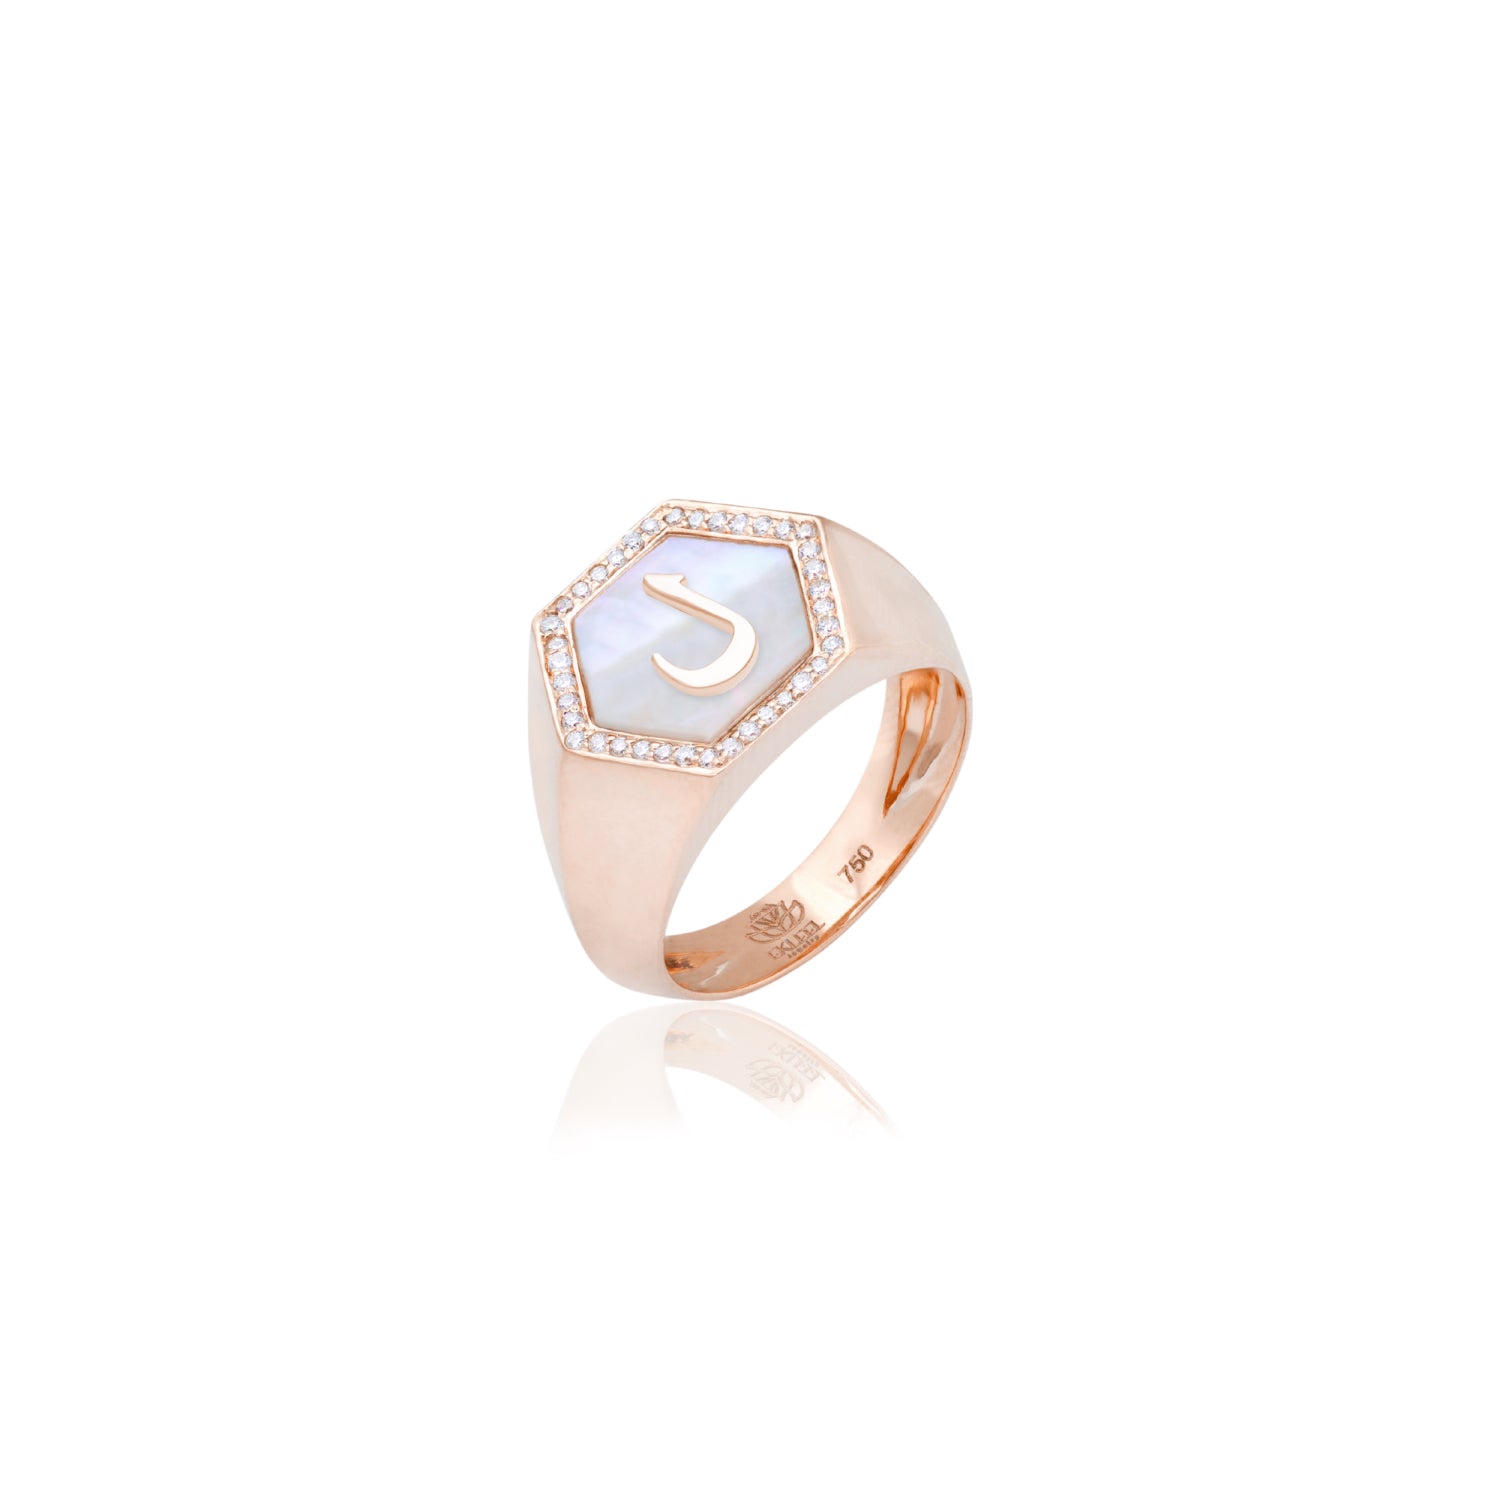 Qamoos 2.0 Letter ل White Mother of Pearl and Diamond Signet Ring in Rose Gold